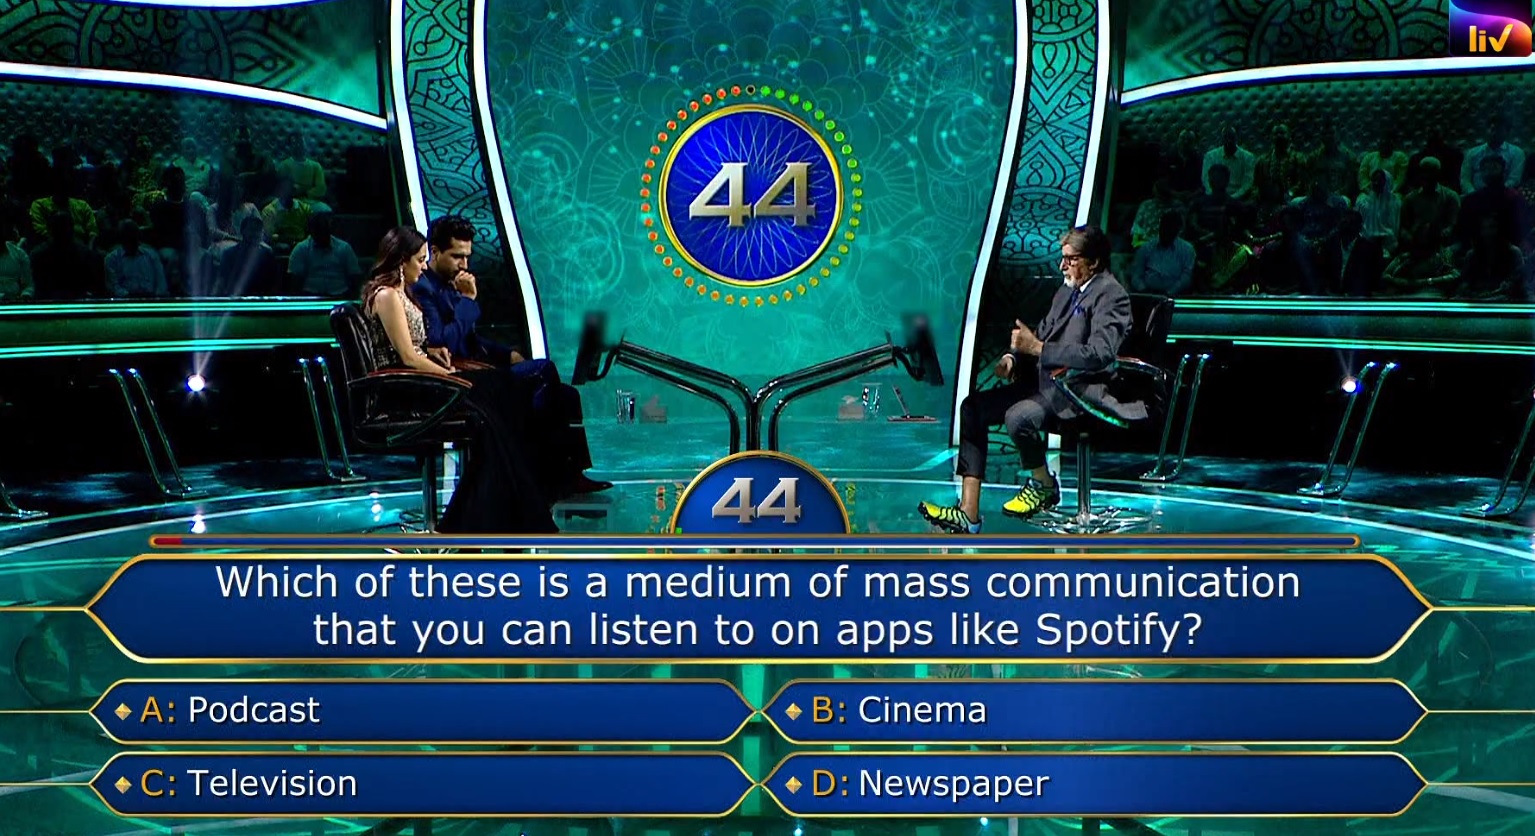 Ques : Which of these is a medium of mass communication that you can listen to on apps like Spotify?